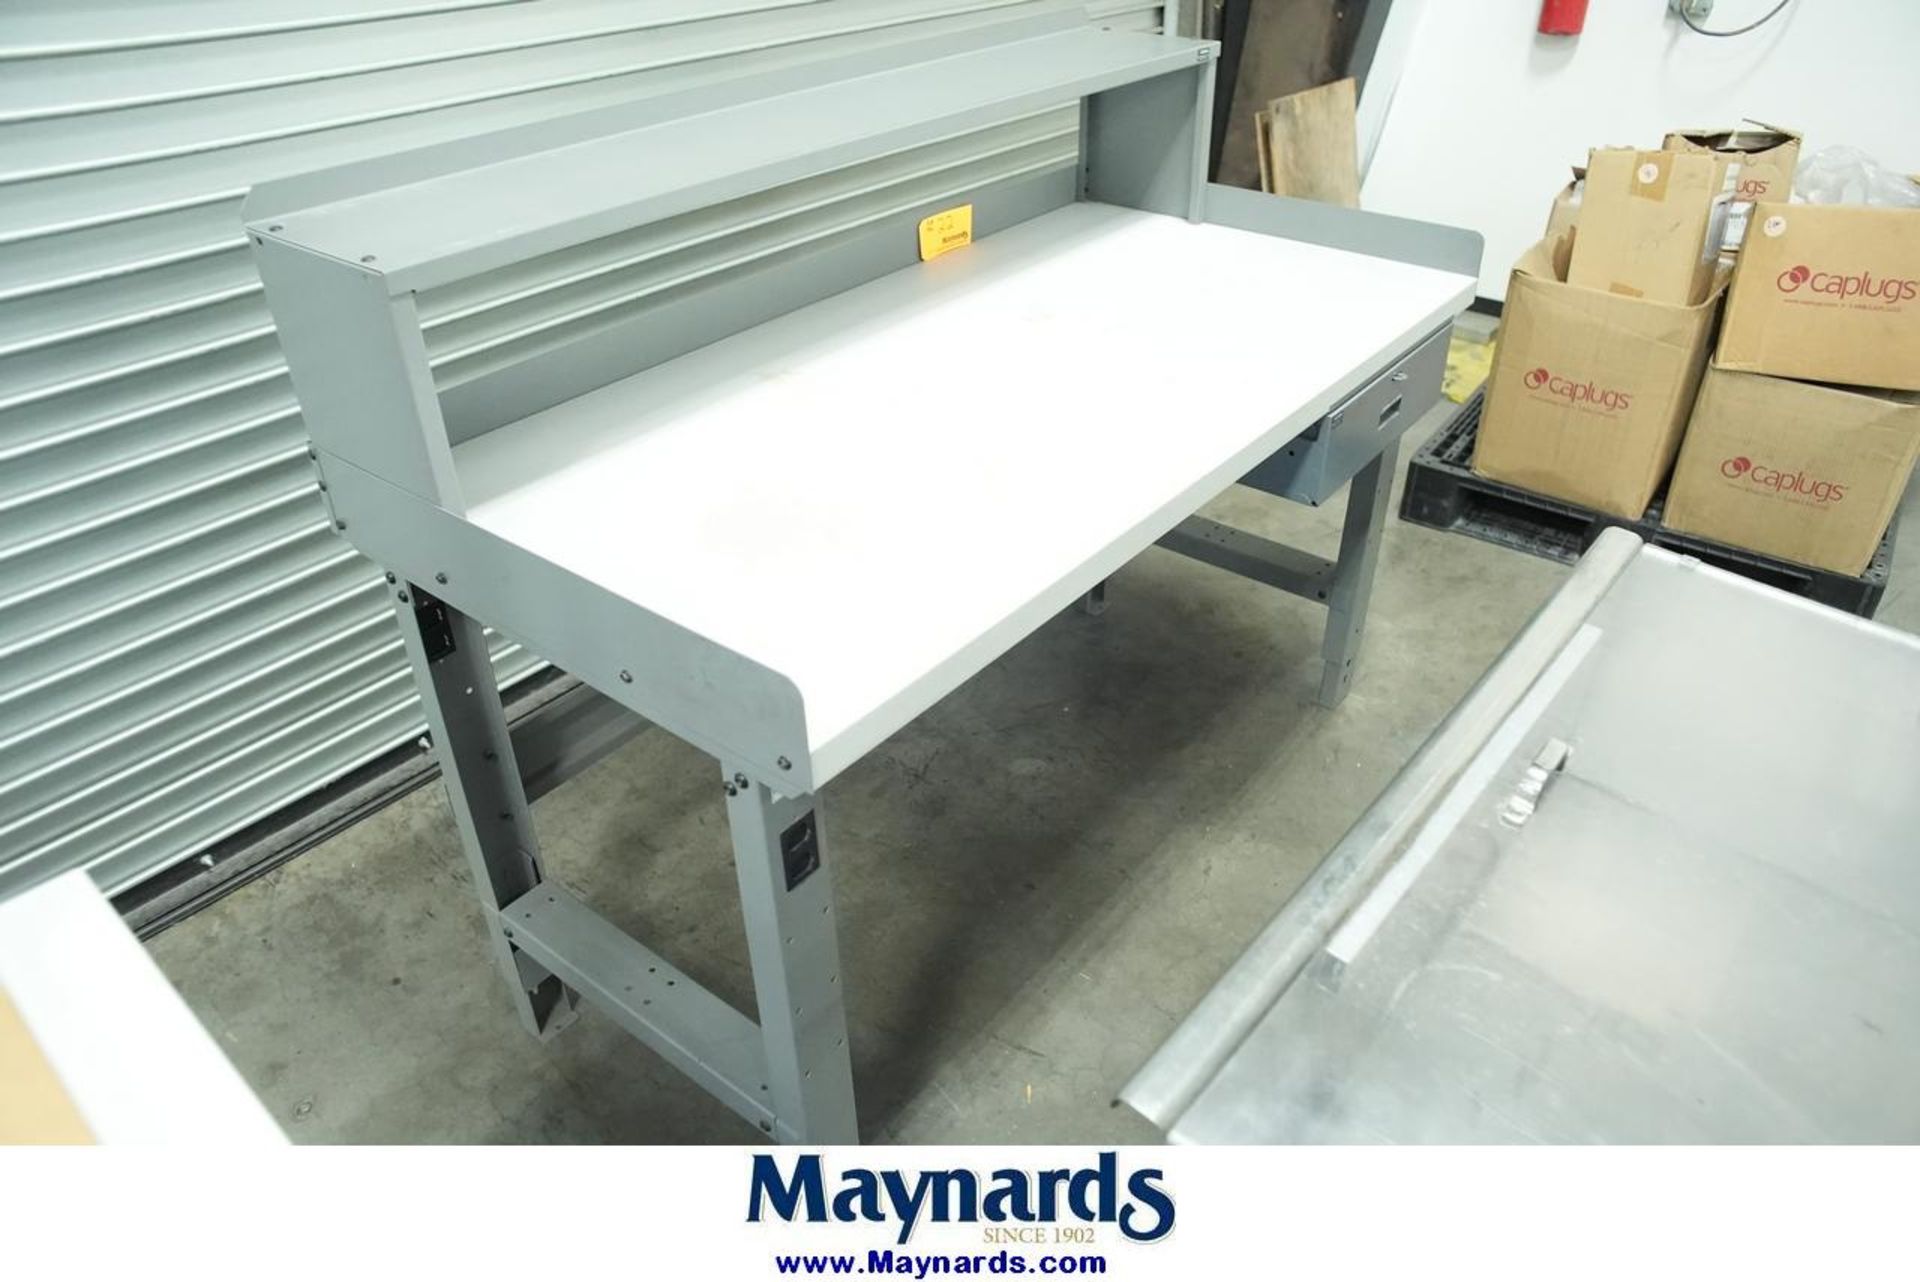 Global Industrial Workbench (5' W x 30" D x 4' Overall Height) - Image 3 of 6